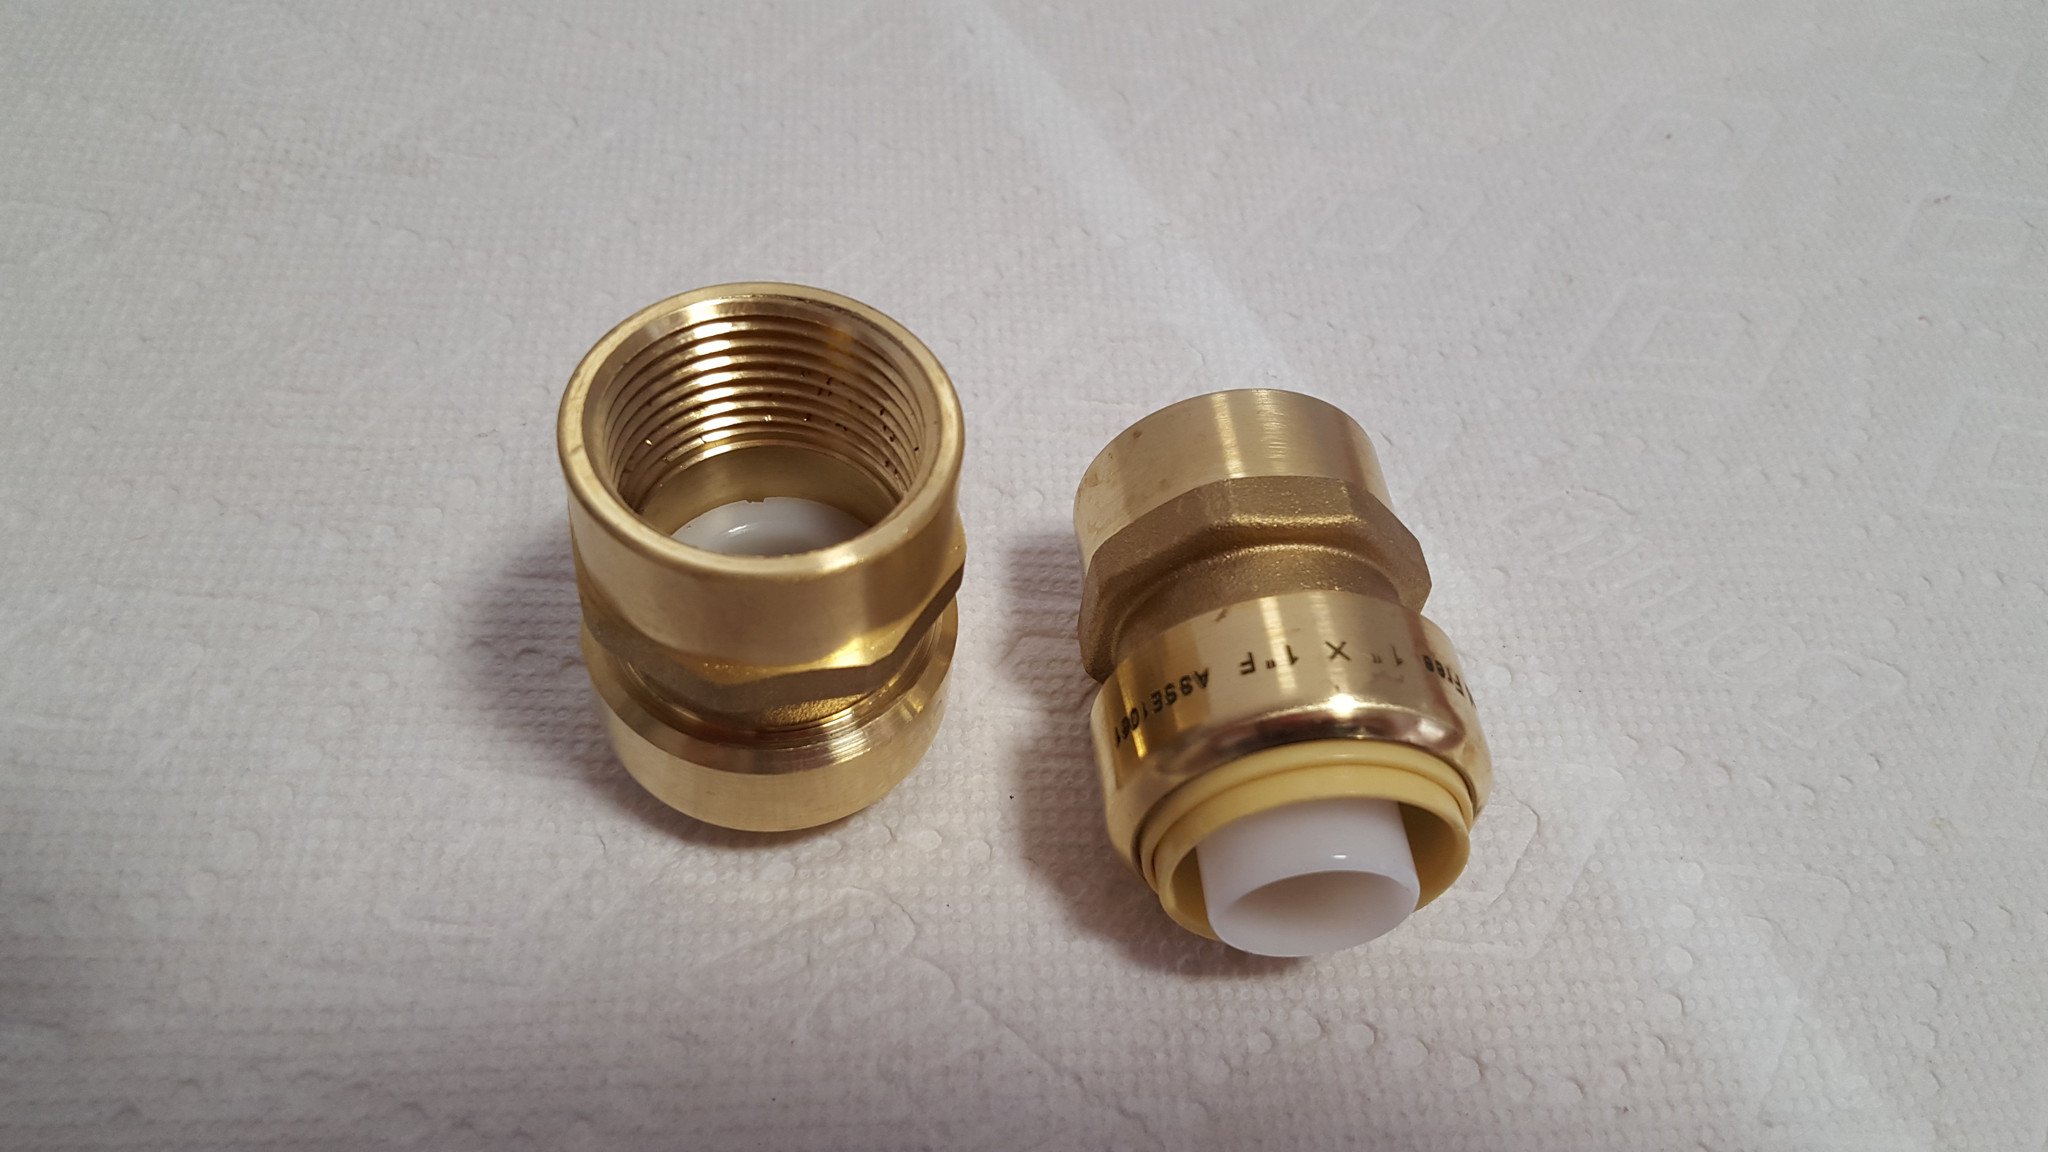 3 /4" FPT (Female Pipe Thread) Push Fitting